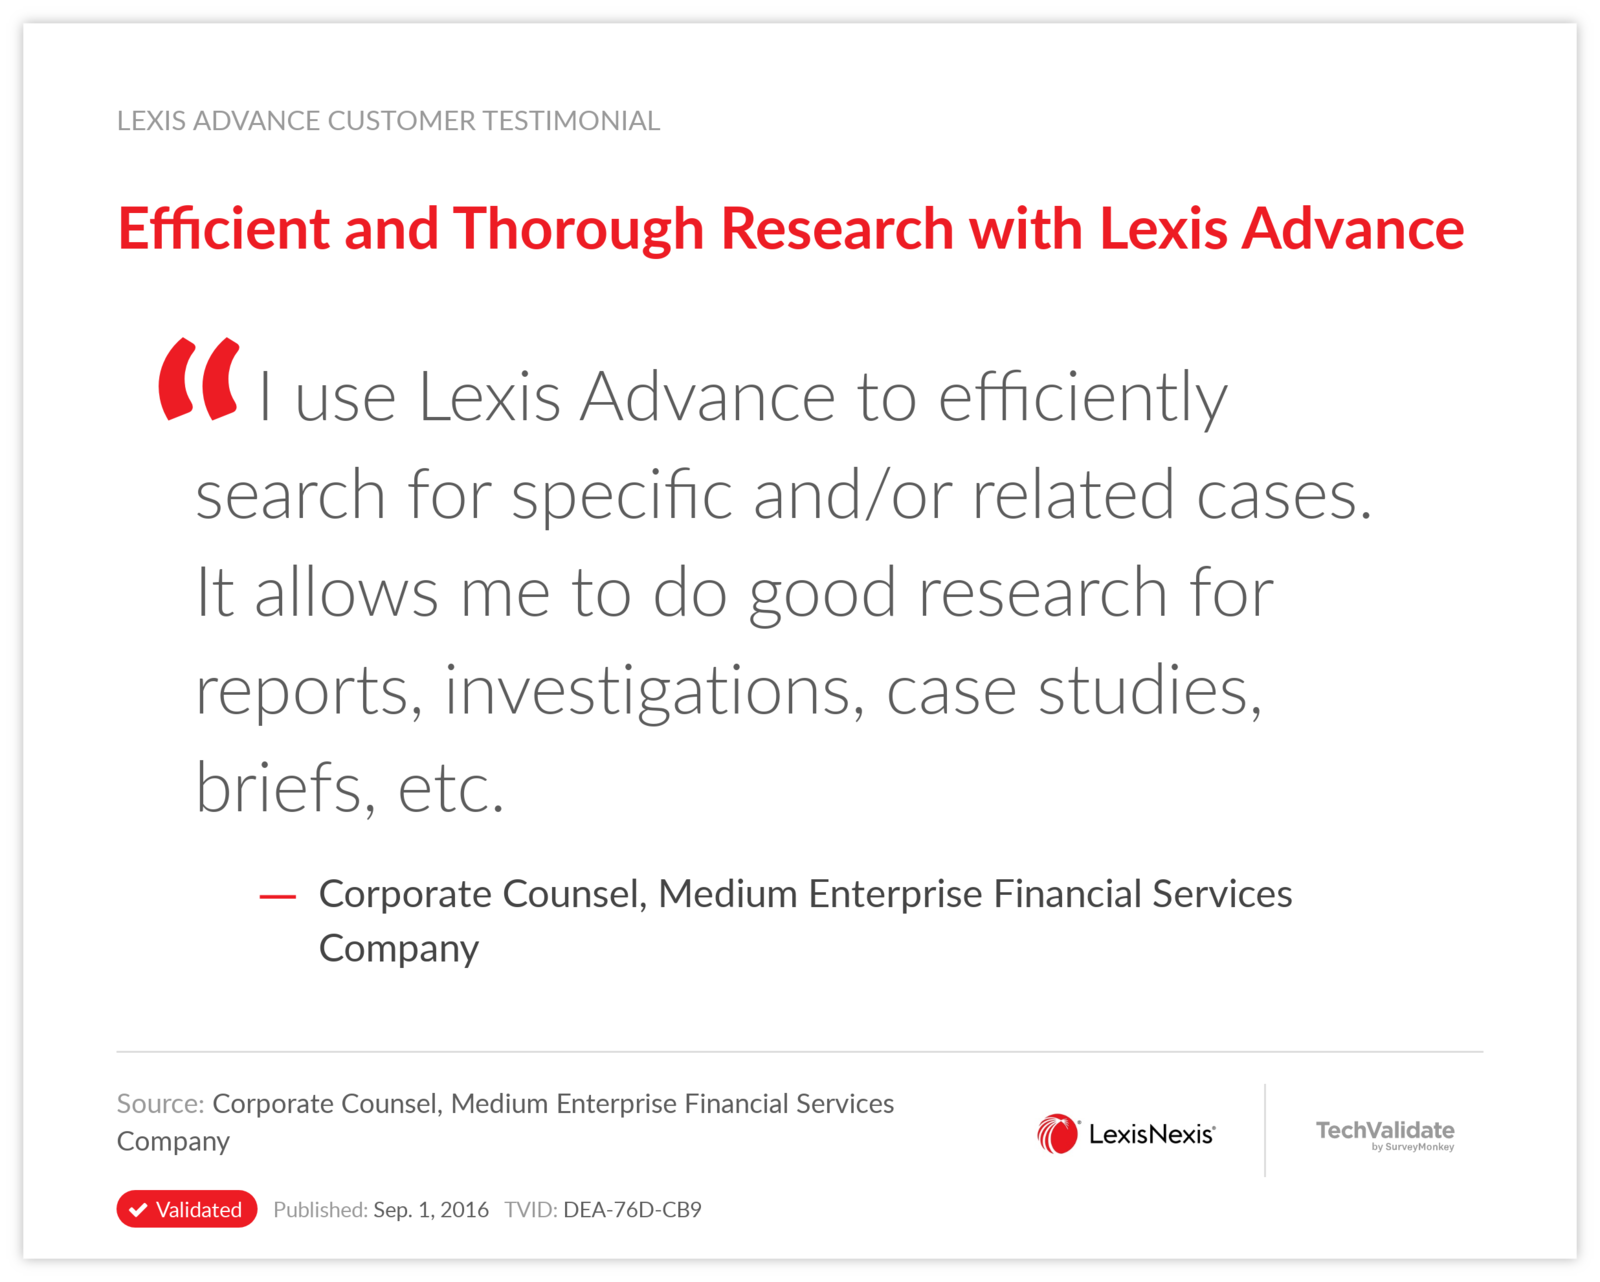 Efficient and Thorough Research with Lexis Advance